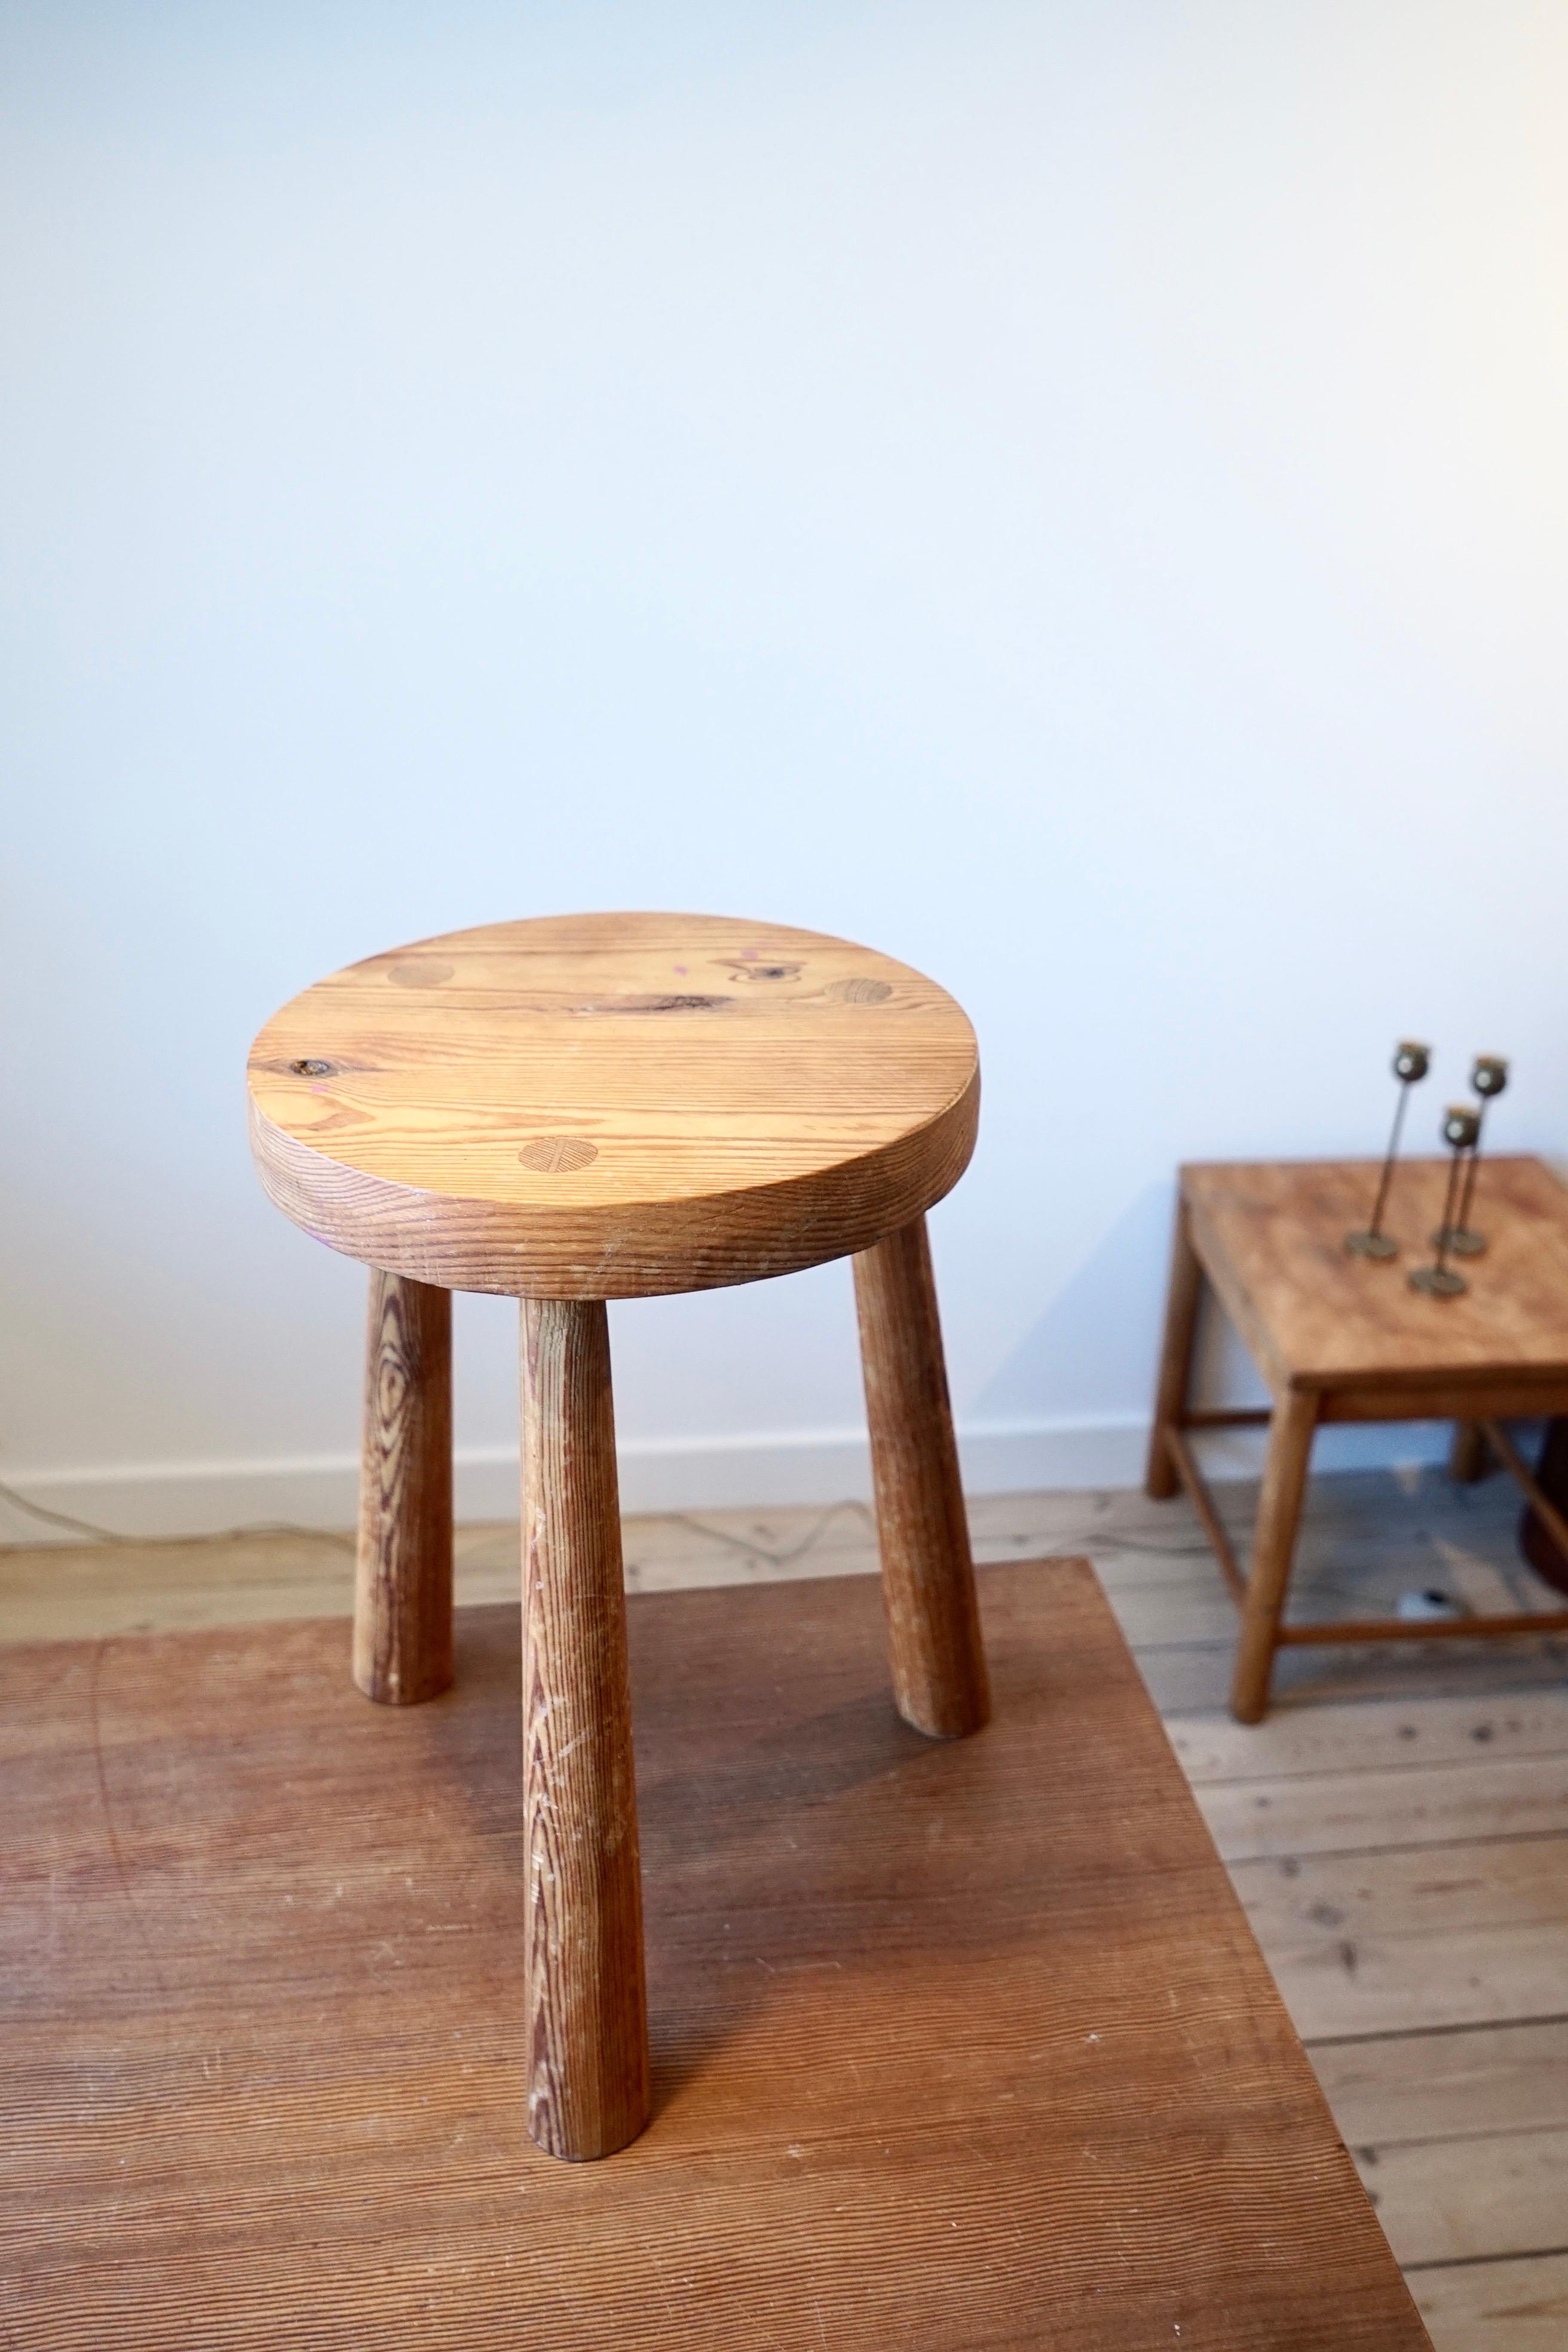 Patinaed Swedish brutalist pine stool from the 1960s.

The stool is made in solid pine with tapped legs, the stool has over the years Gotten a beautiful patina.

The stool is typical Scandinavian and will be a great addition to any interior and